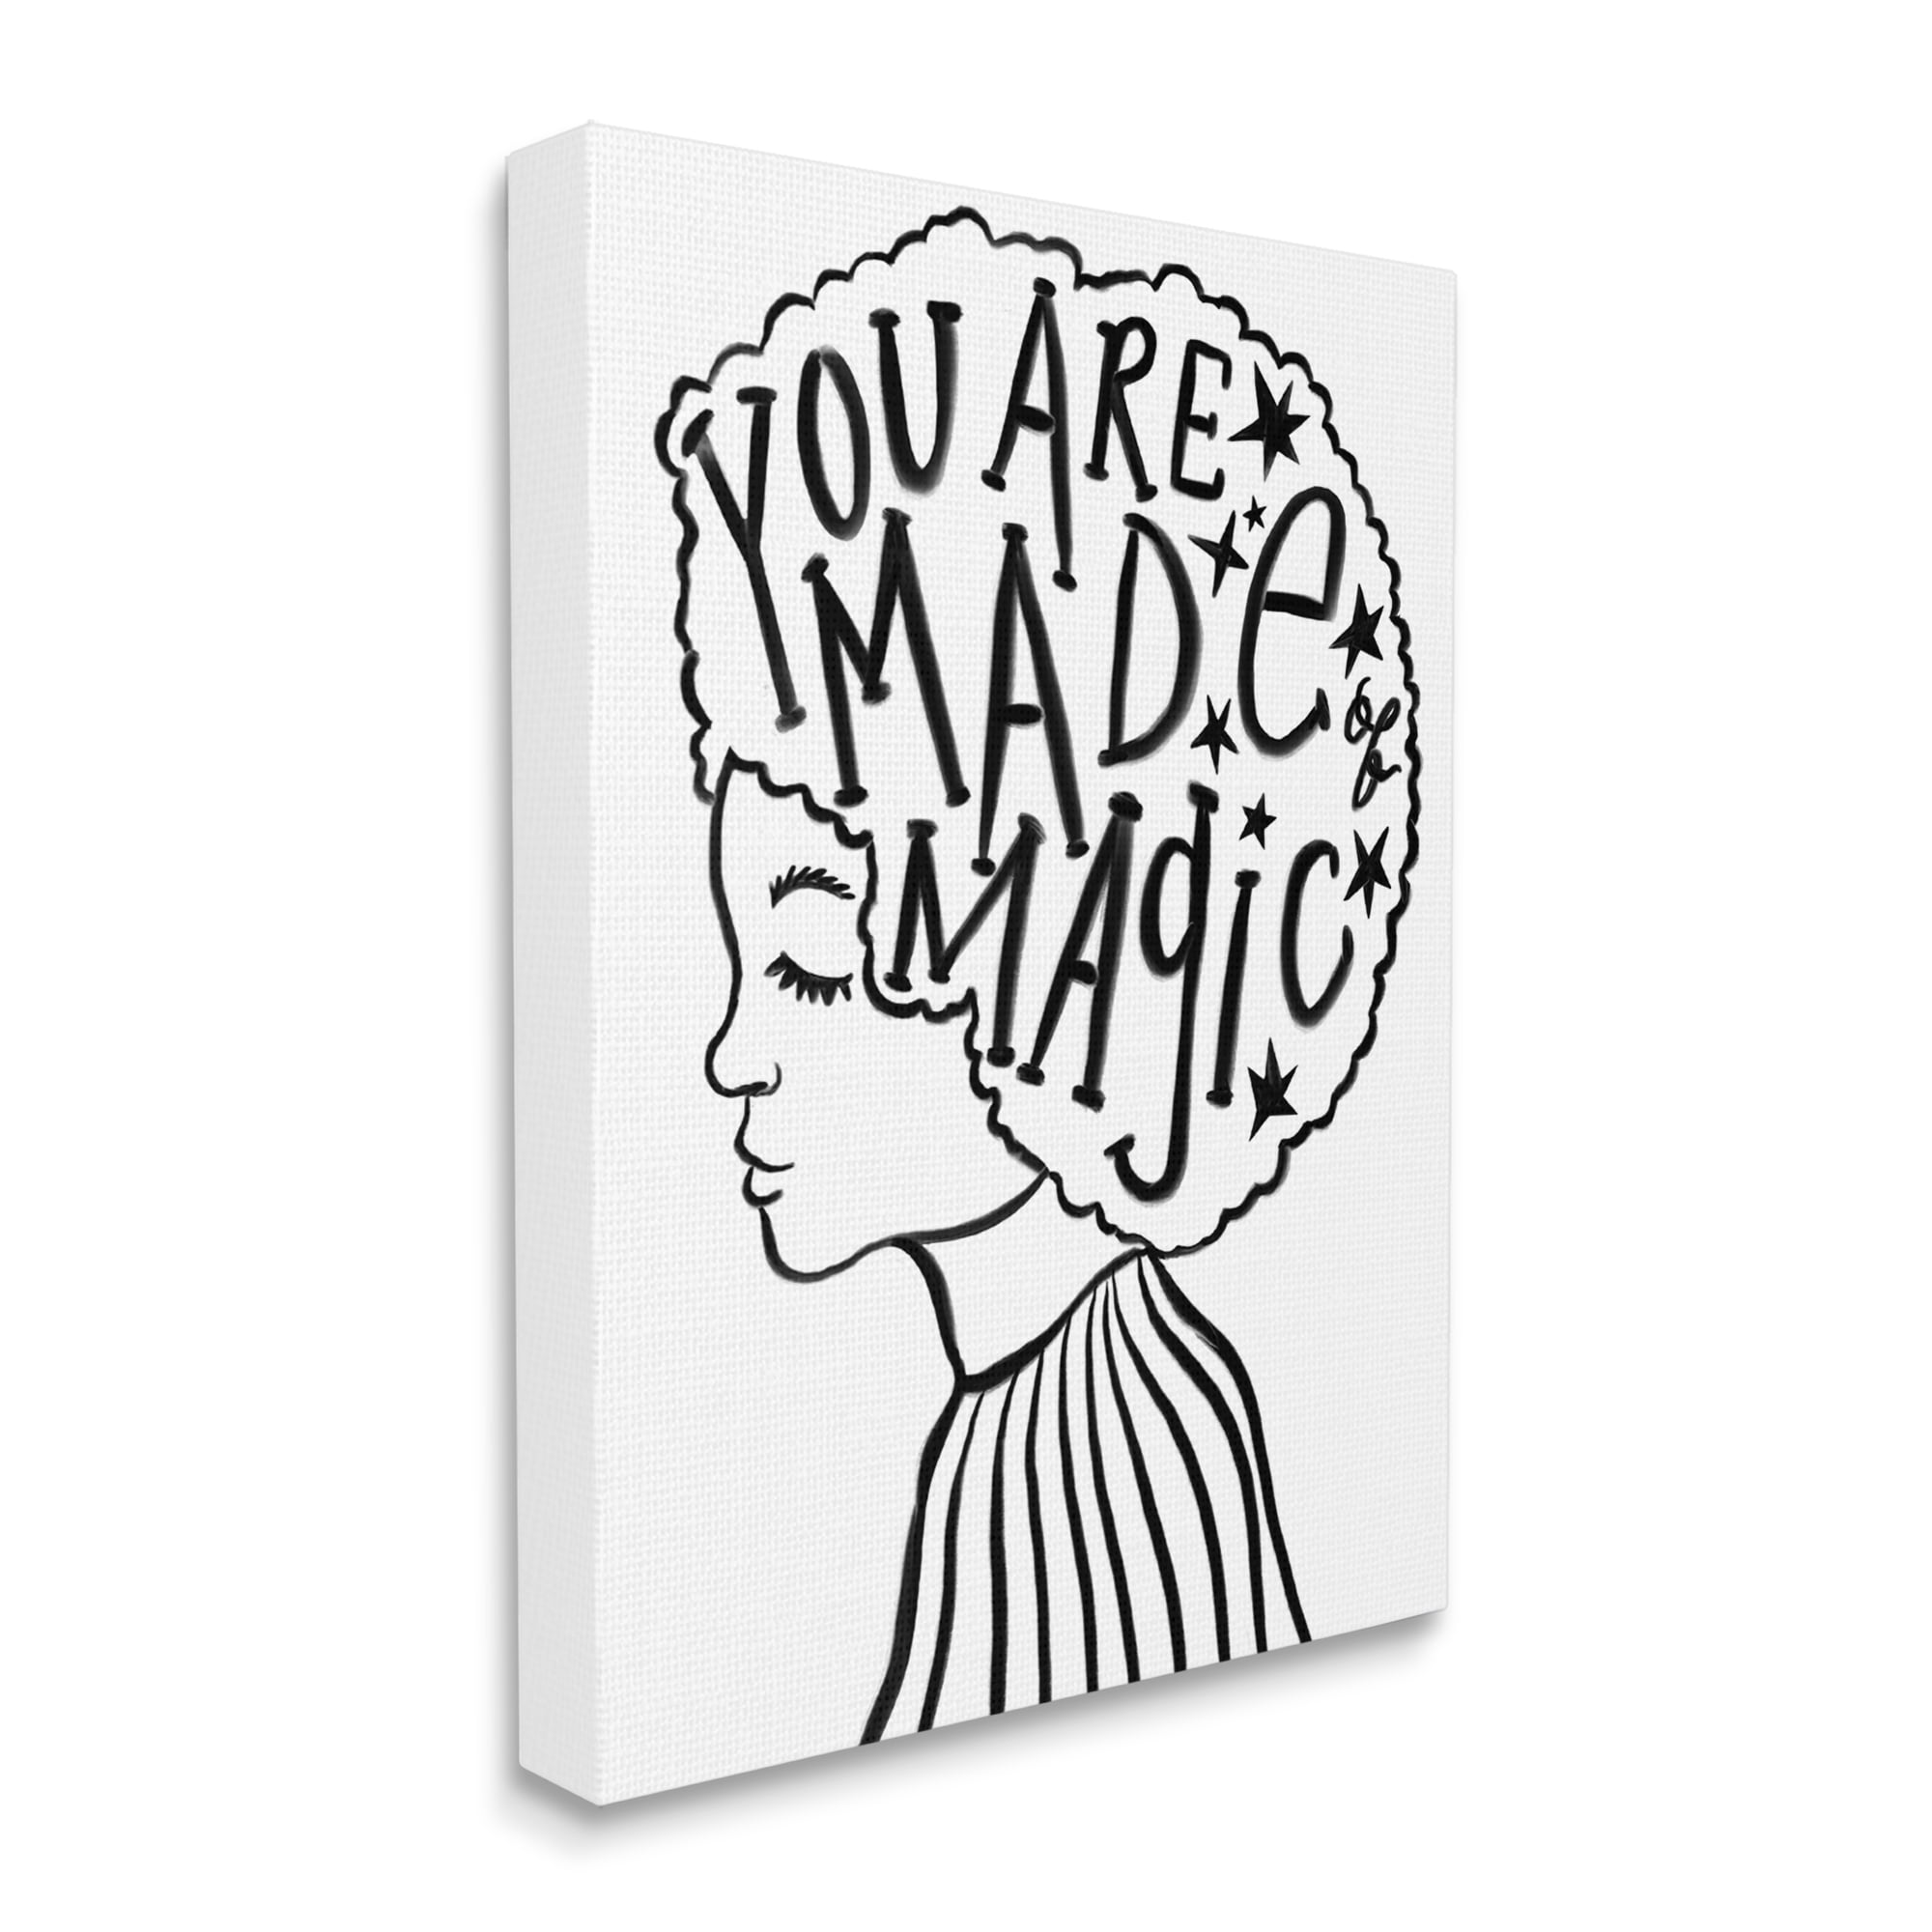 Designed by Daphne Polselli Wall Plaque 10 x 15 Stupell Industries Made of Magic Phrase Children's Hair Portrait White